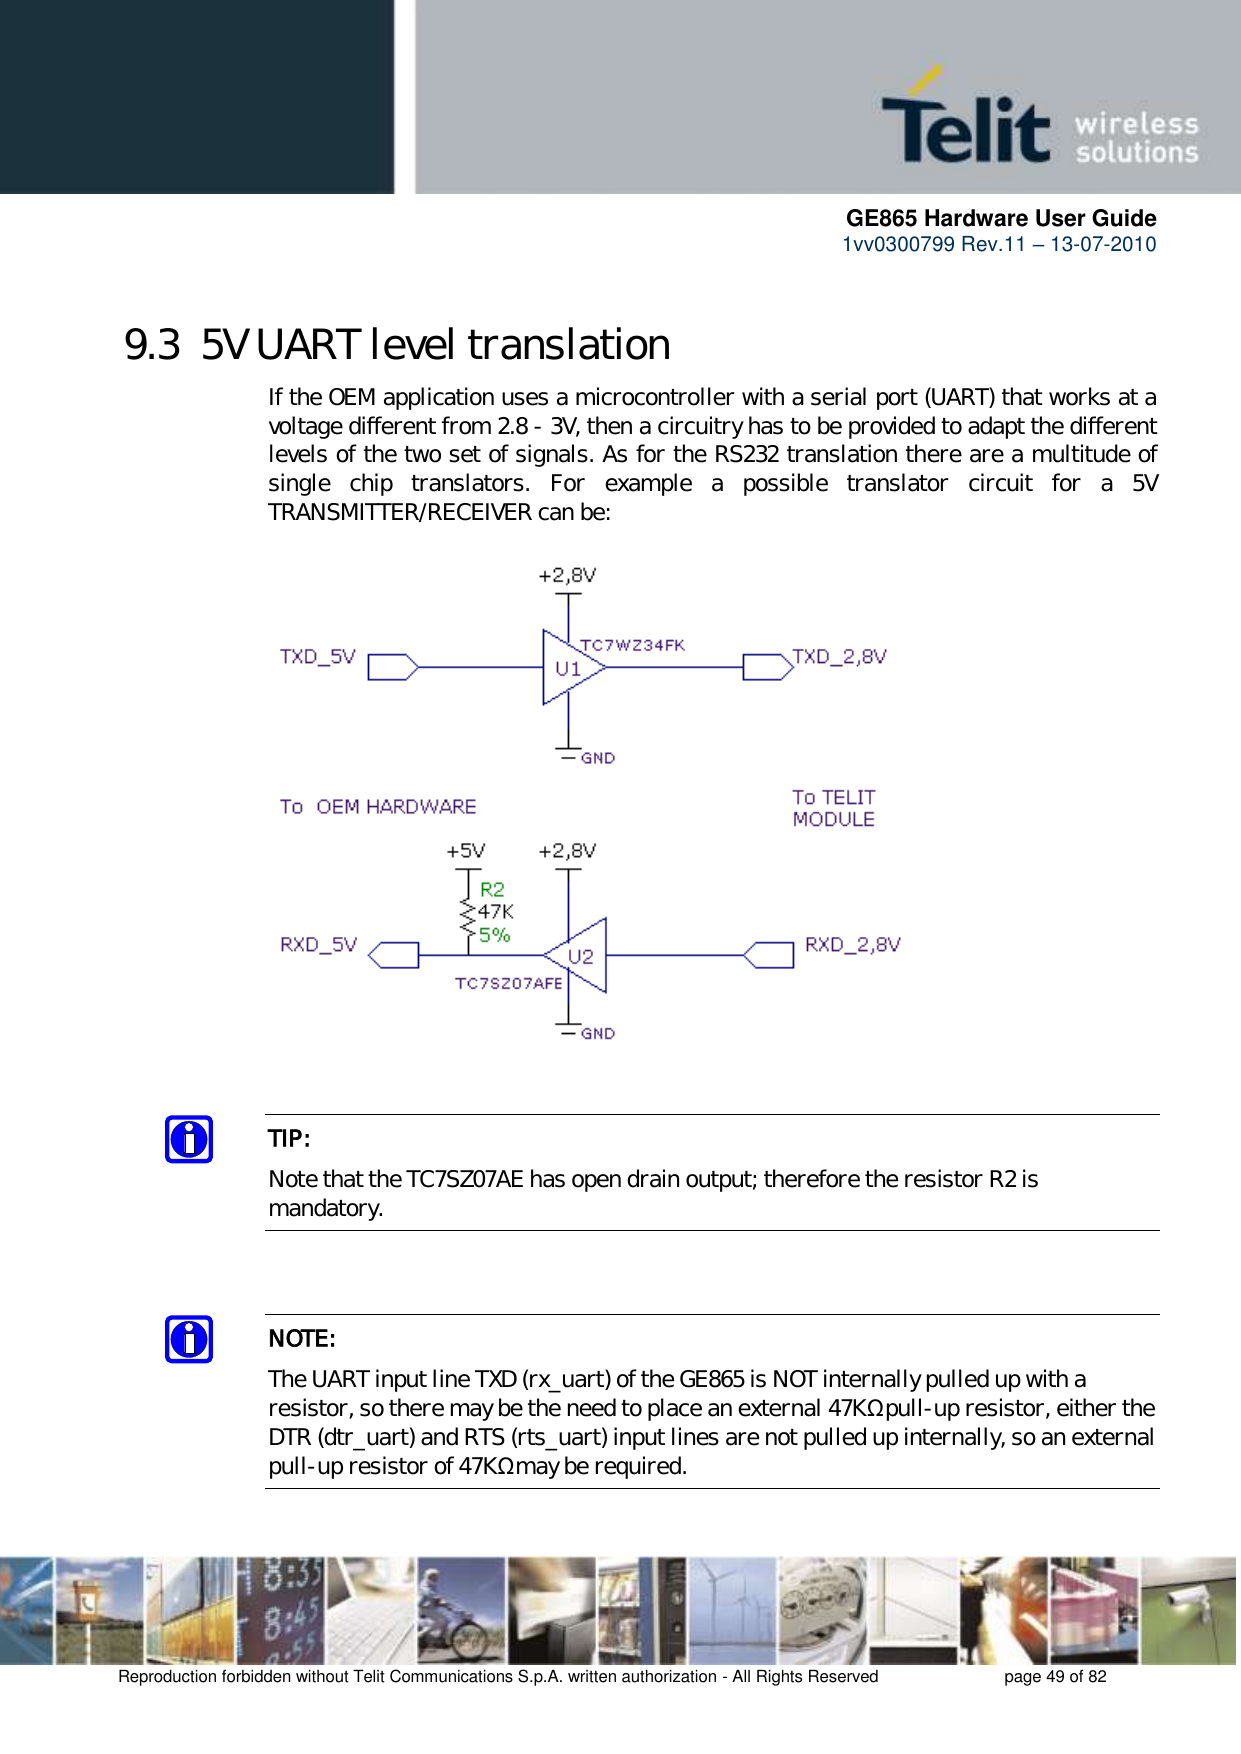      GE865 Hardware User Guide 1vv0300799 Rev.11 – 13-07-2010       Reproduction forbidden without Telit Communications S.p.A. written authorization - All Rights Reserved    page 49 of 82  9.3  5V UART level translation If the OEM application uses a microcontroller with a serial port (UART) that works at a voltage different from 2.8 - 3V, then a circuitry has to be provided to adapt the different levels of the two set of signals. As for the RS232 translation there are a multitude of single  chip  translators.  For  example  a  possible  translator  circuit  for  a  5V TRANSMITTER/RECEIVER can be:     TIP: Note that the TC7SZ07AE has open drain output; therefore the resistor R2 is mandatory.   NOTE: The UART input line TXD (rx_uart) of the GE865 is NOT internally pulled up with a  resistor, so there may be the need to place an external 47KΩ pull-up resistor, either the DTR (dtr_uart) and RTS (rts_uart) input lines are not pulled up internally, so an external pull-up resistor of 47KΩ may be required.  